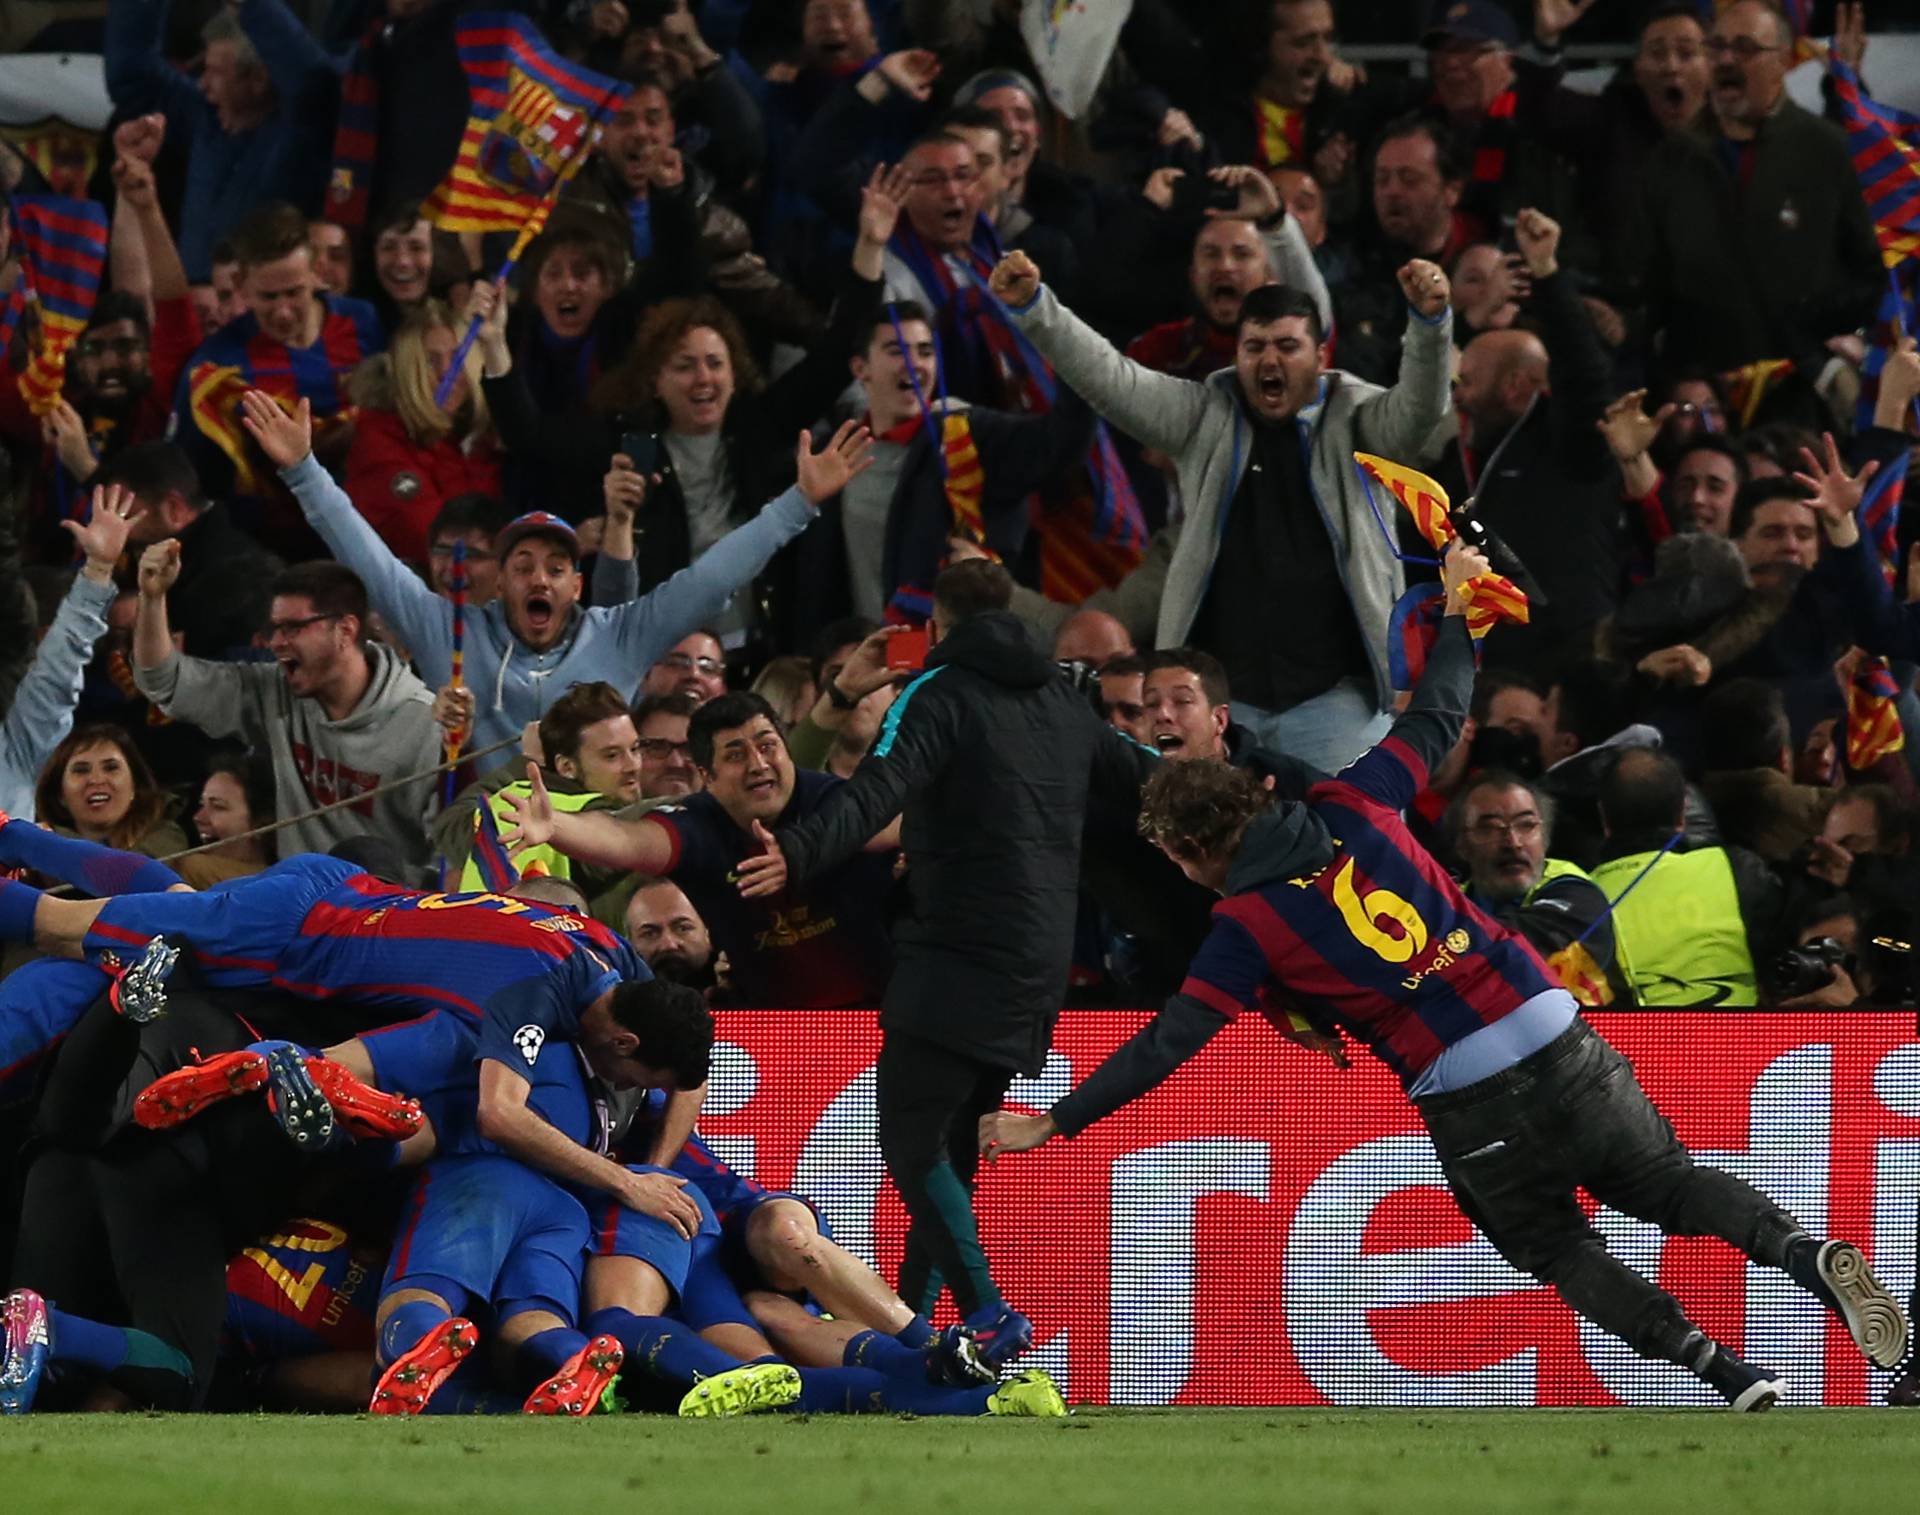 Barcelona's Sergi Roberto celebrates scoring their sixth goal with team mates and fans